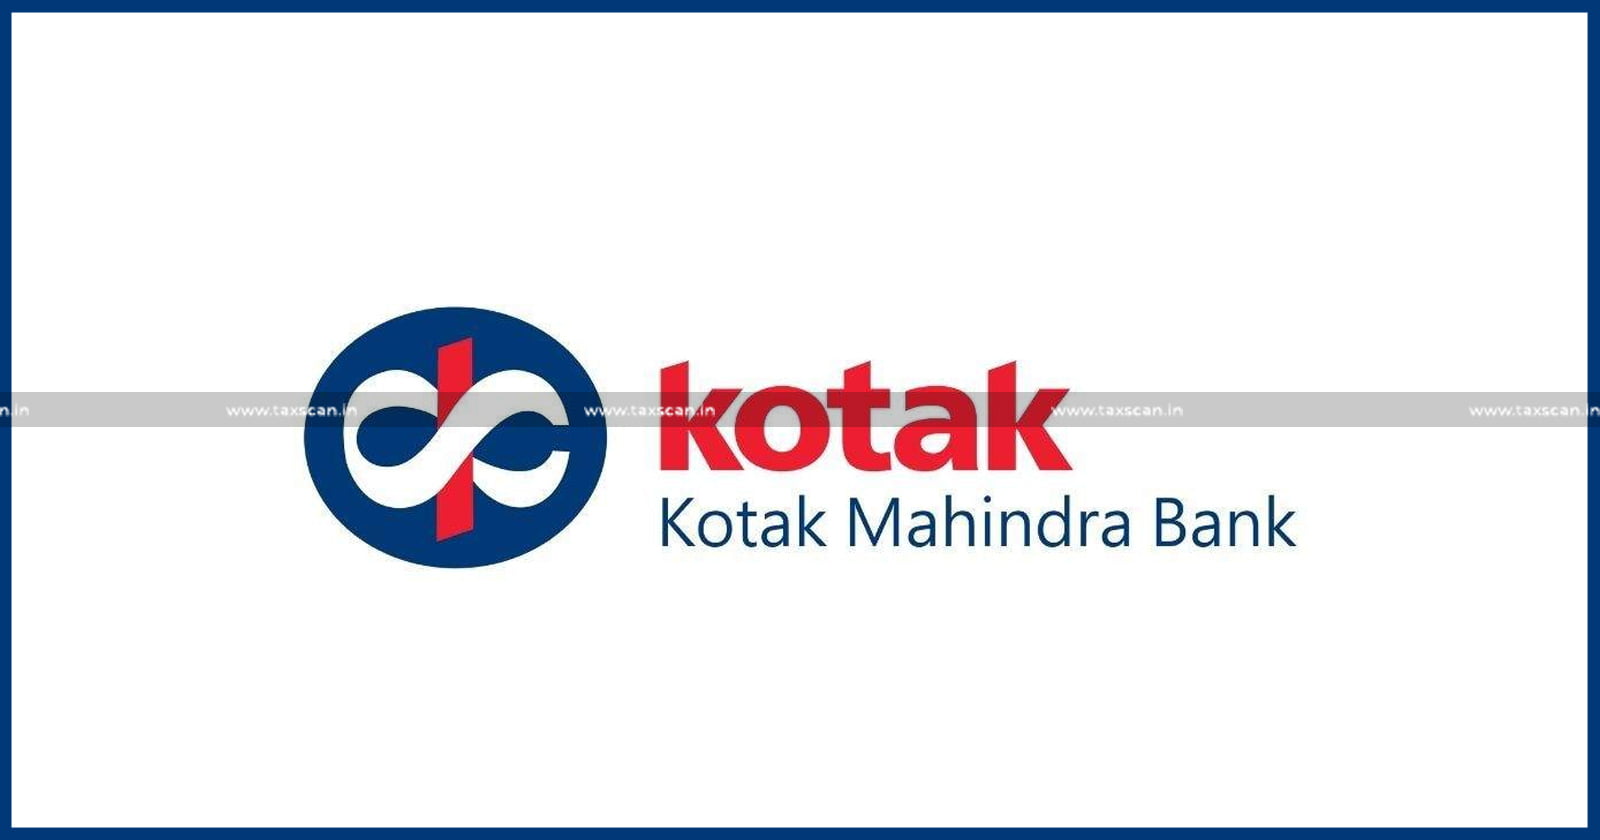 Relief - Kotak- Mahindra- Bank-Supreme- Court - Settlement-Commission-Granting- Immunity - Penalty - Income-Tax-TAXSCAN